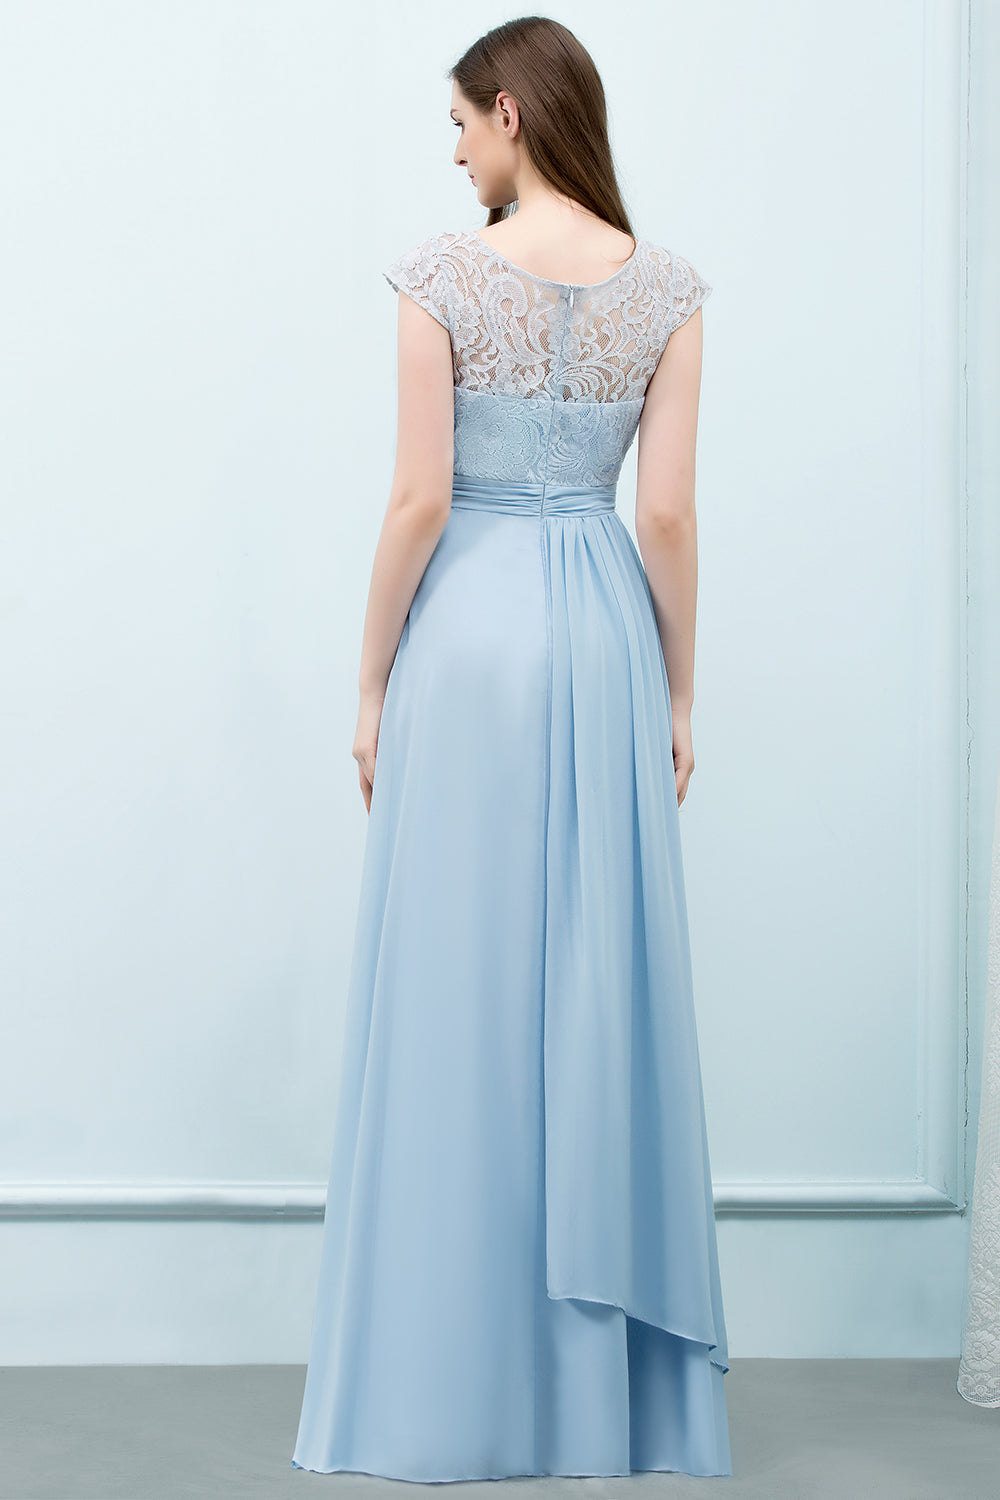 Affordable Lace Sleeveless Blue Bridesmaid Dresses With Scoop Cap-27dress